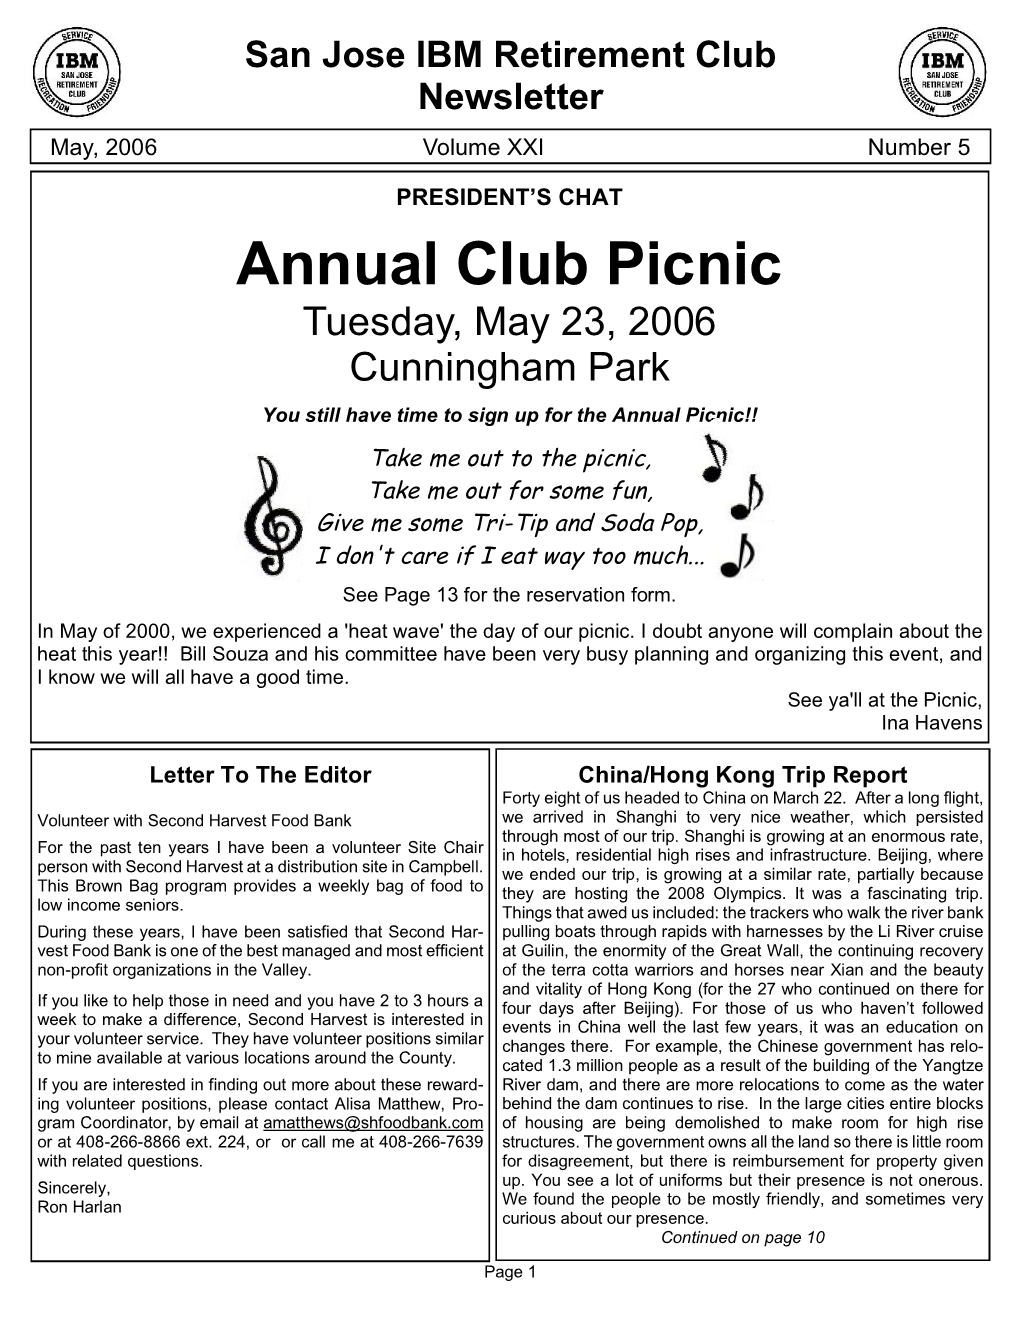 Annual Club Picnic Tuesday, May 23, 2006 Cunningham Park You Still Have Time to Sign up for the Annual Picnic!!